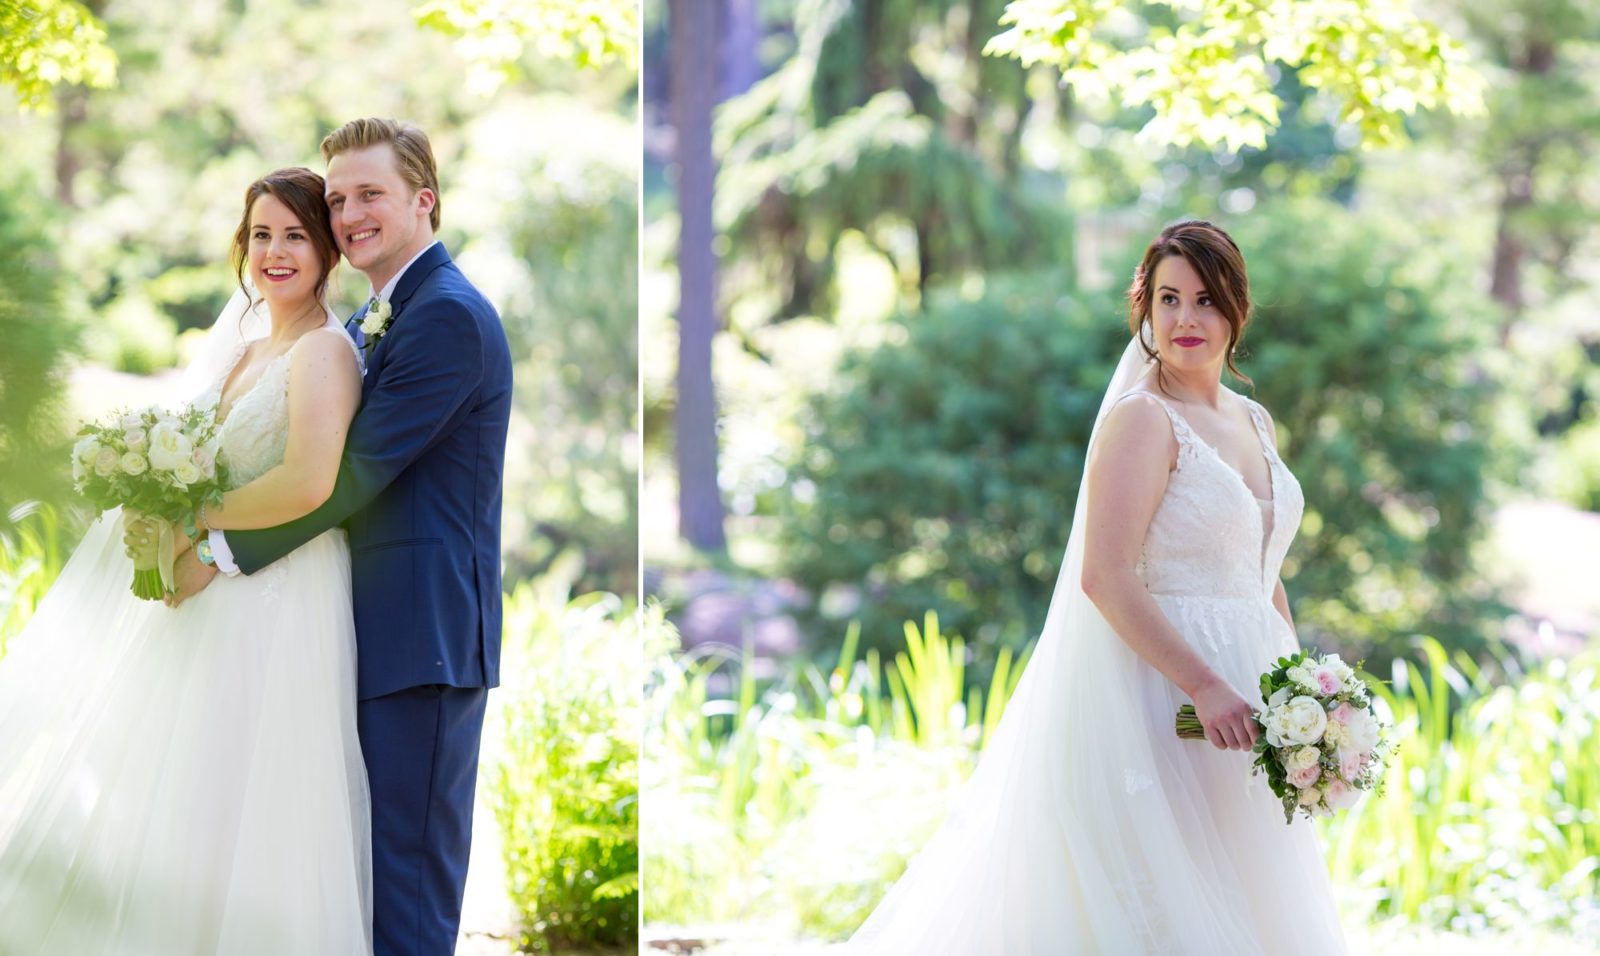 Bride and groom photo session at Fabyan Japanese Garden